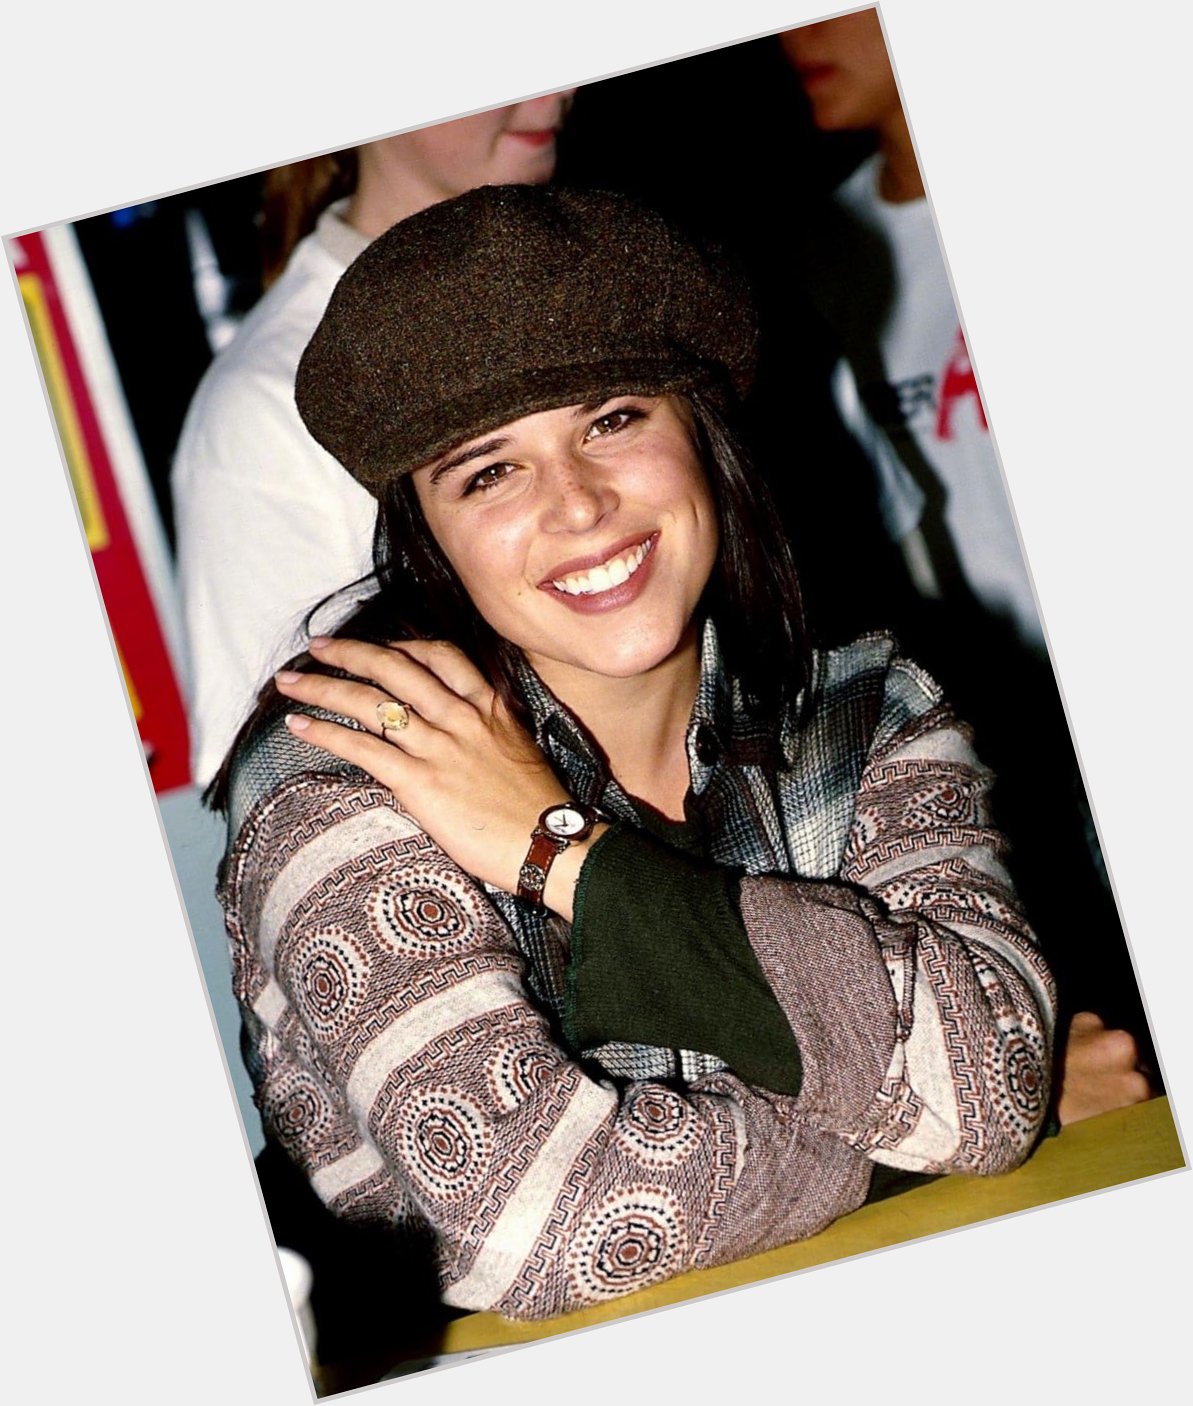 Happy birthday to neve campbell i love her so much <3 